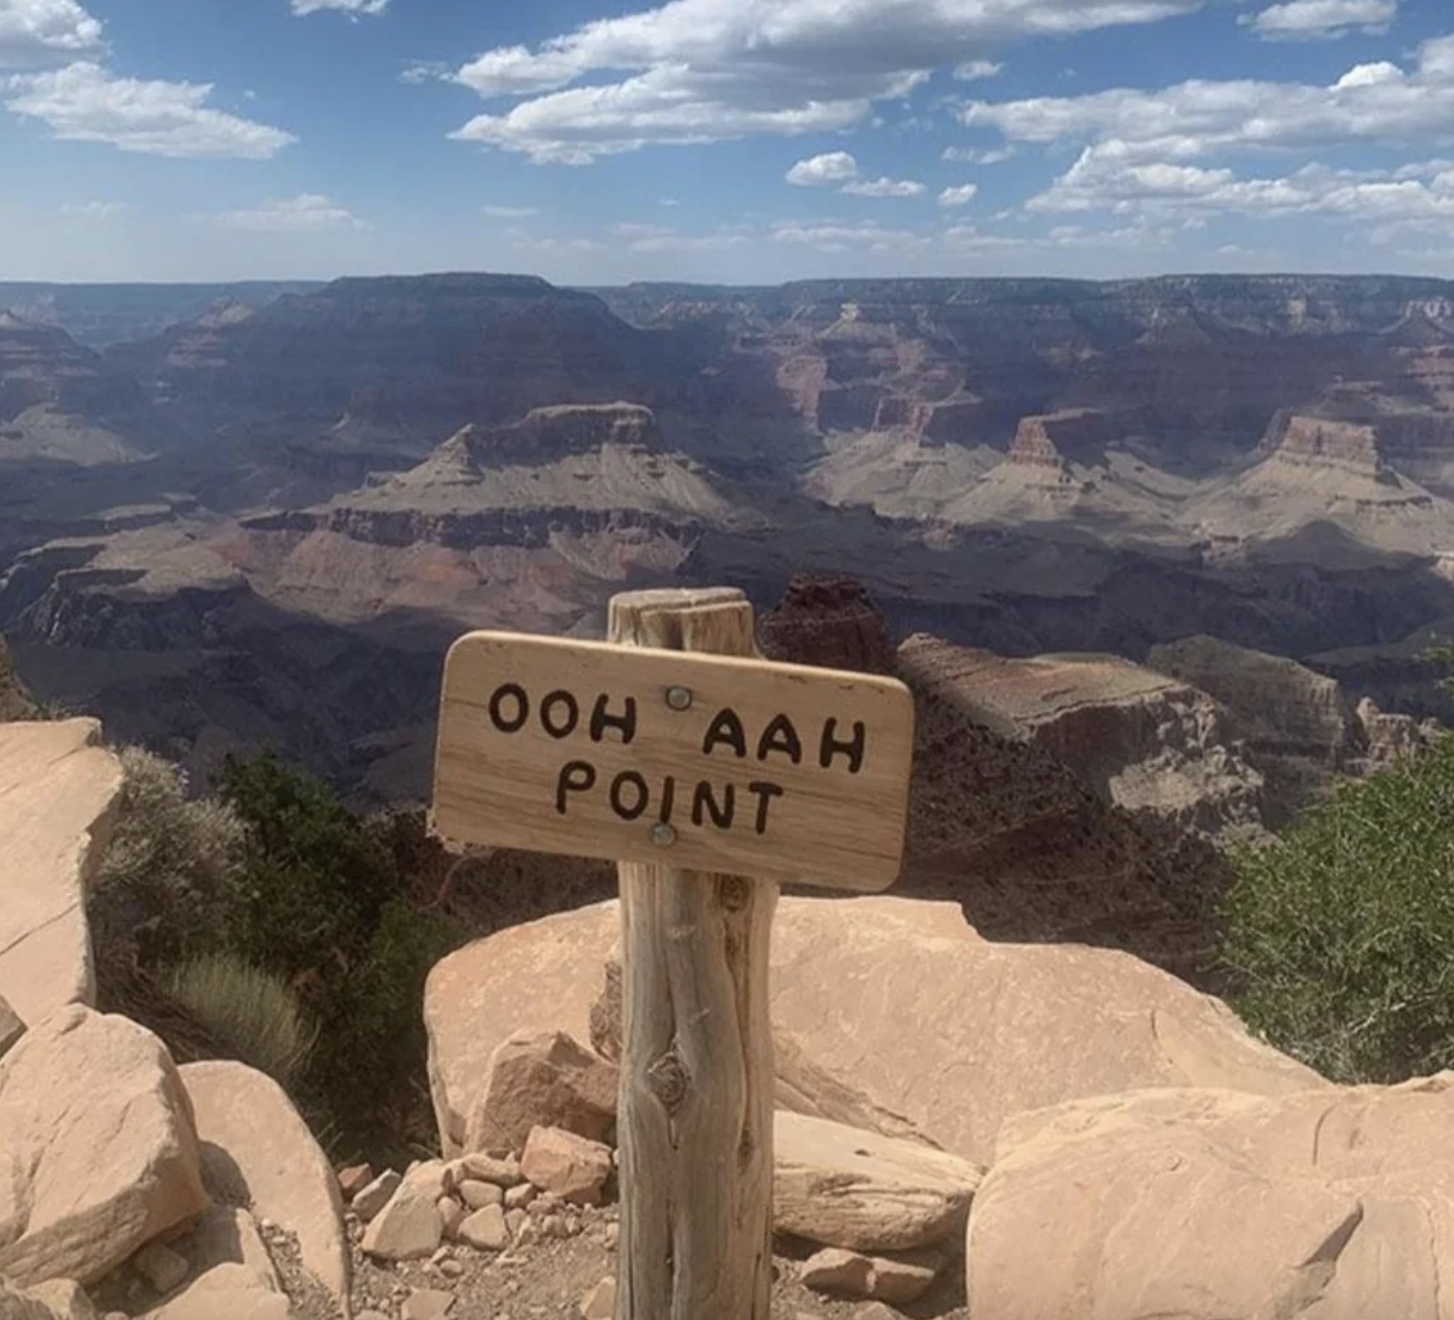 top of the mountain has a sign that says, ooh aah point